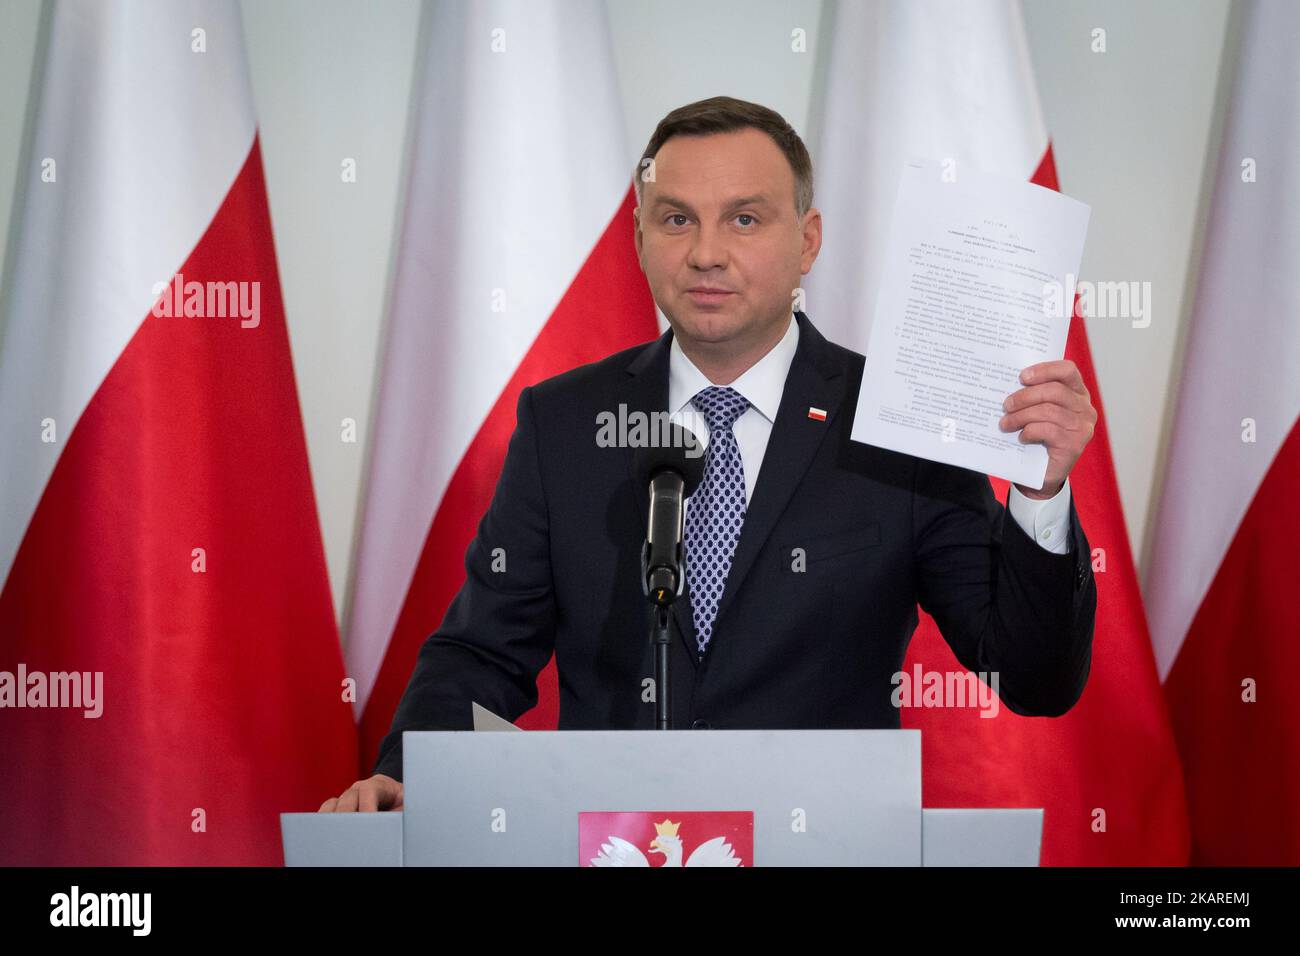 President of Poland Andrzej Duda speaks during the press conference about Polish judicary system reforms at Presidential Palace in Warsaw, Poland on 25 September 2017. President Duda presented his draft legislation to reform the Supreme Court (SN) and the National Council of Judiciary (KRS). In July 2017, Duda vetoed Supreme Court and National Judiciary Council bills voted by the Polish Sejm's majority. Large protests have been held across Poland over rules passed 20 July by the ruling party that would limit the independence of the judiciary. (Photo by Mateusz Wlodarczyk/NurPhoto) Stock Photo